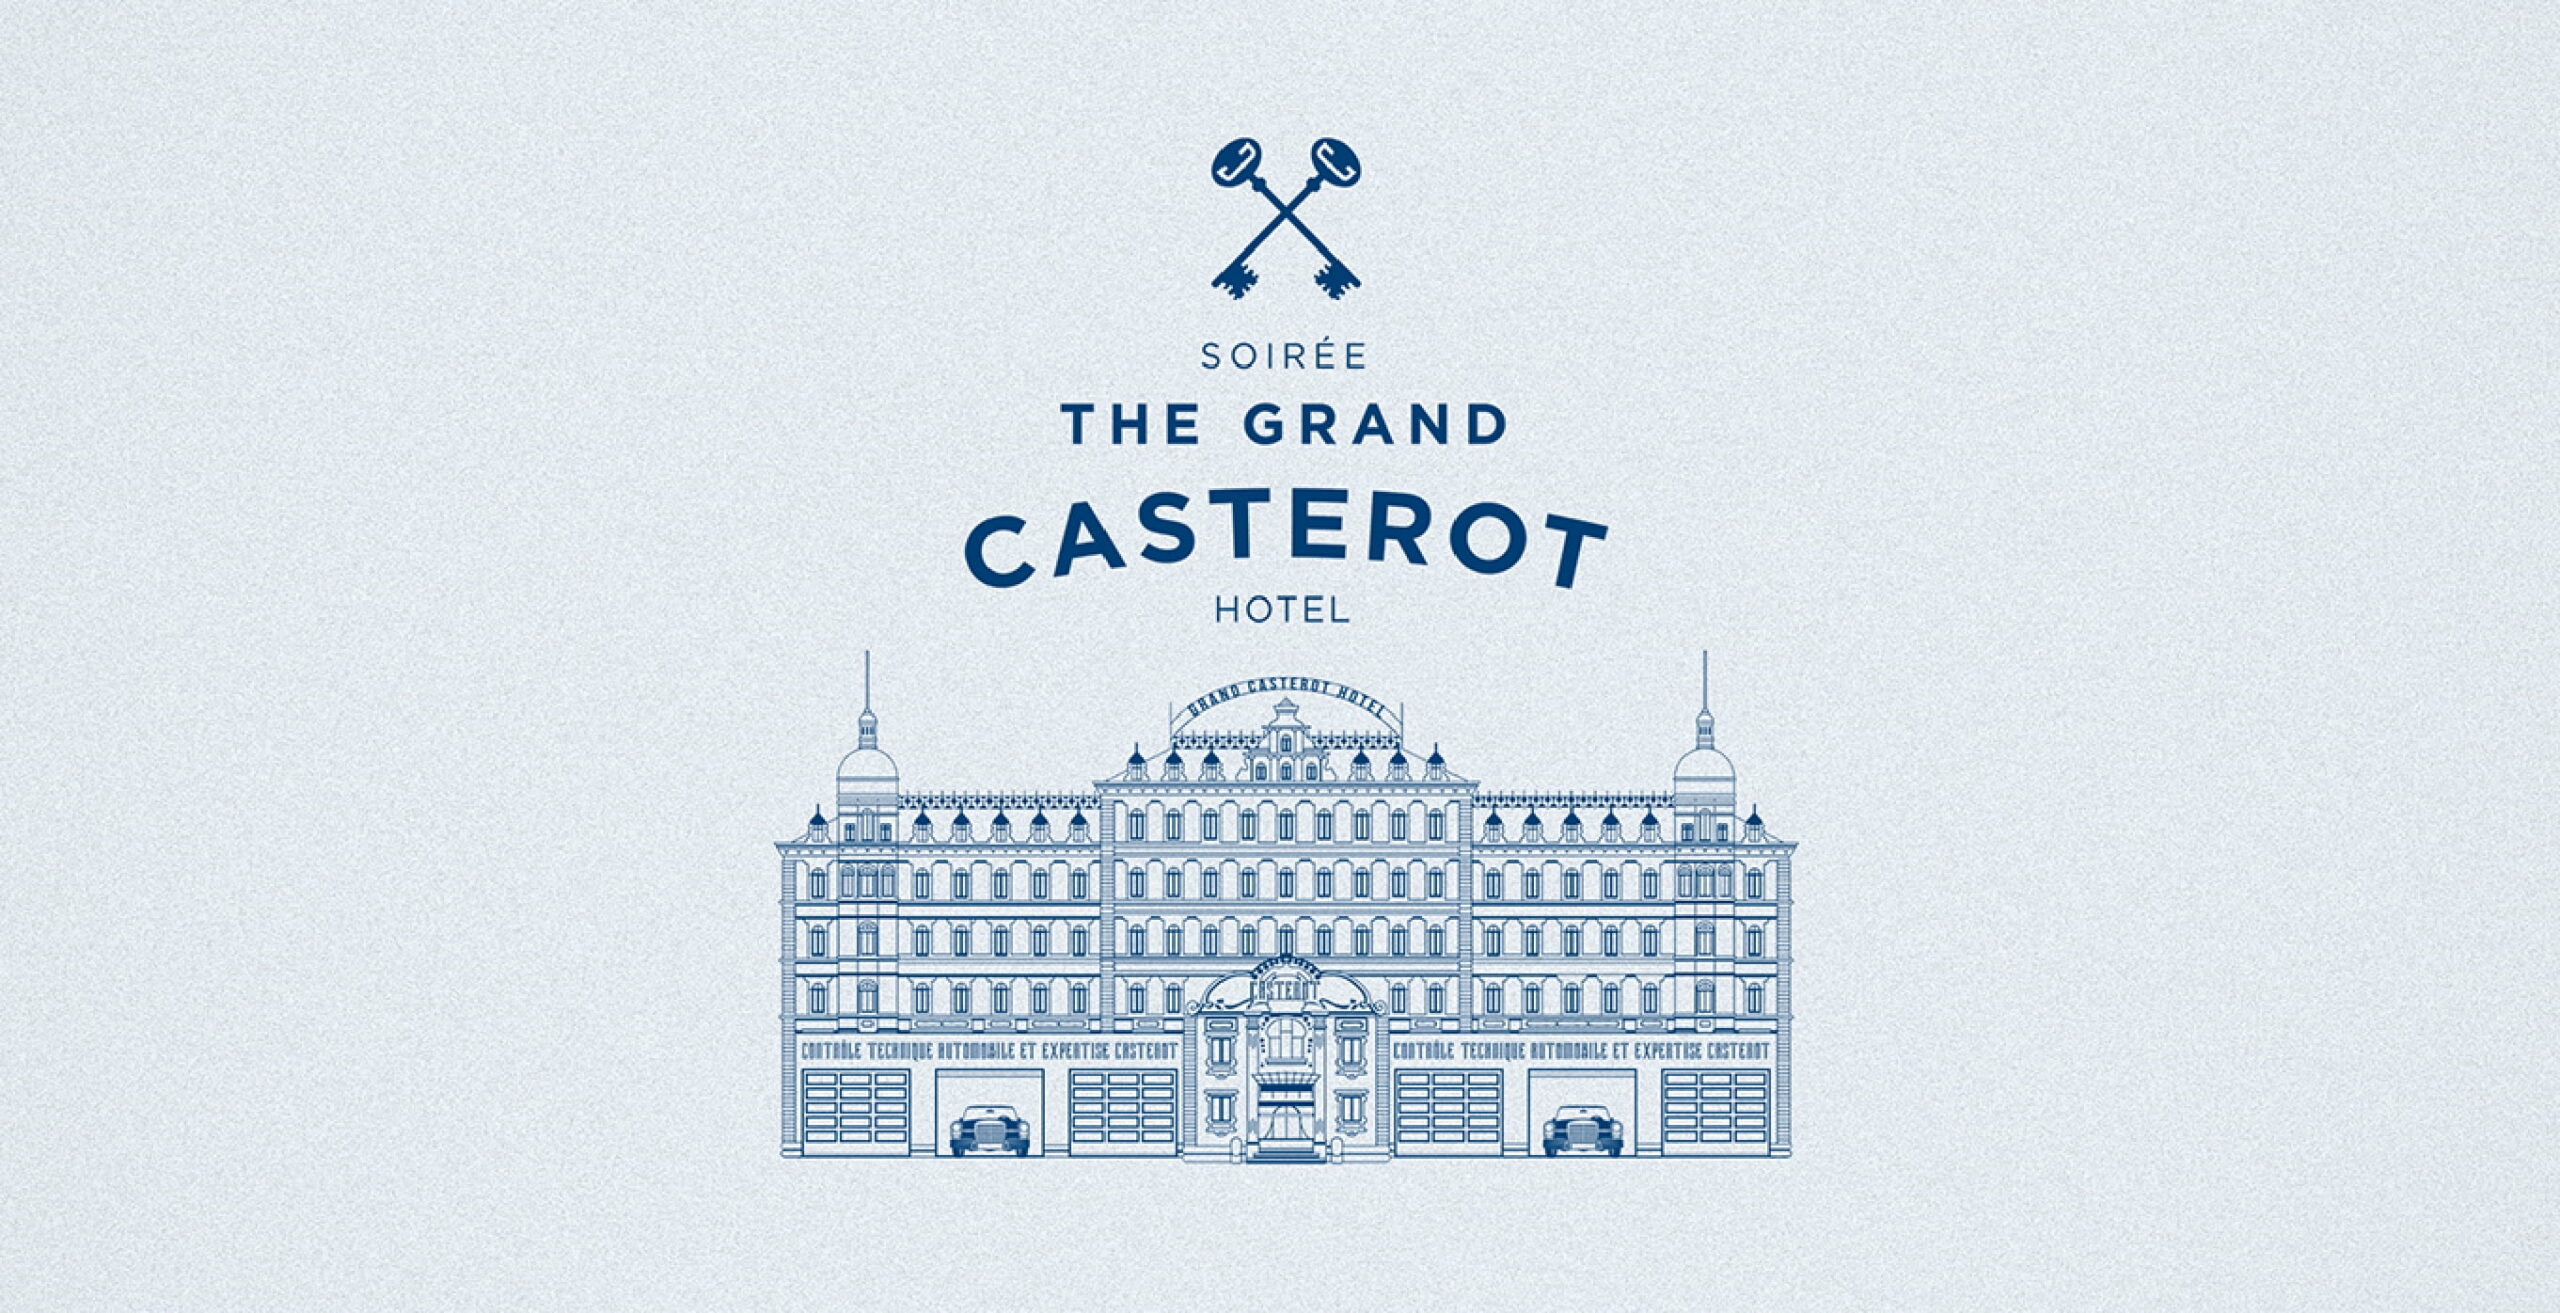 The Grand Casterot